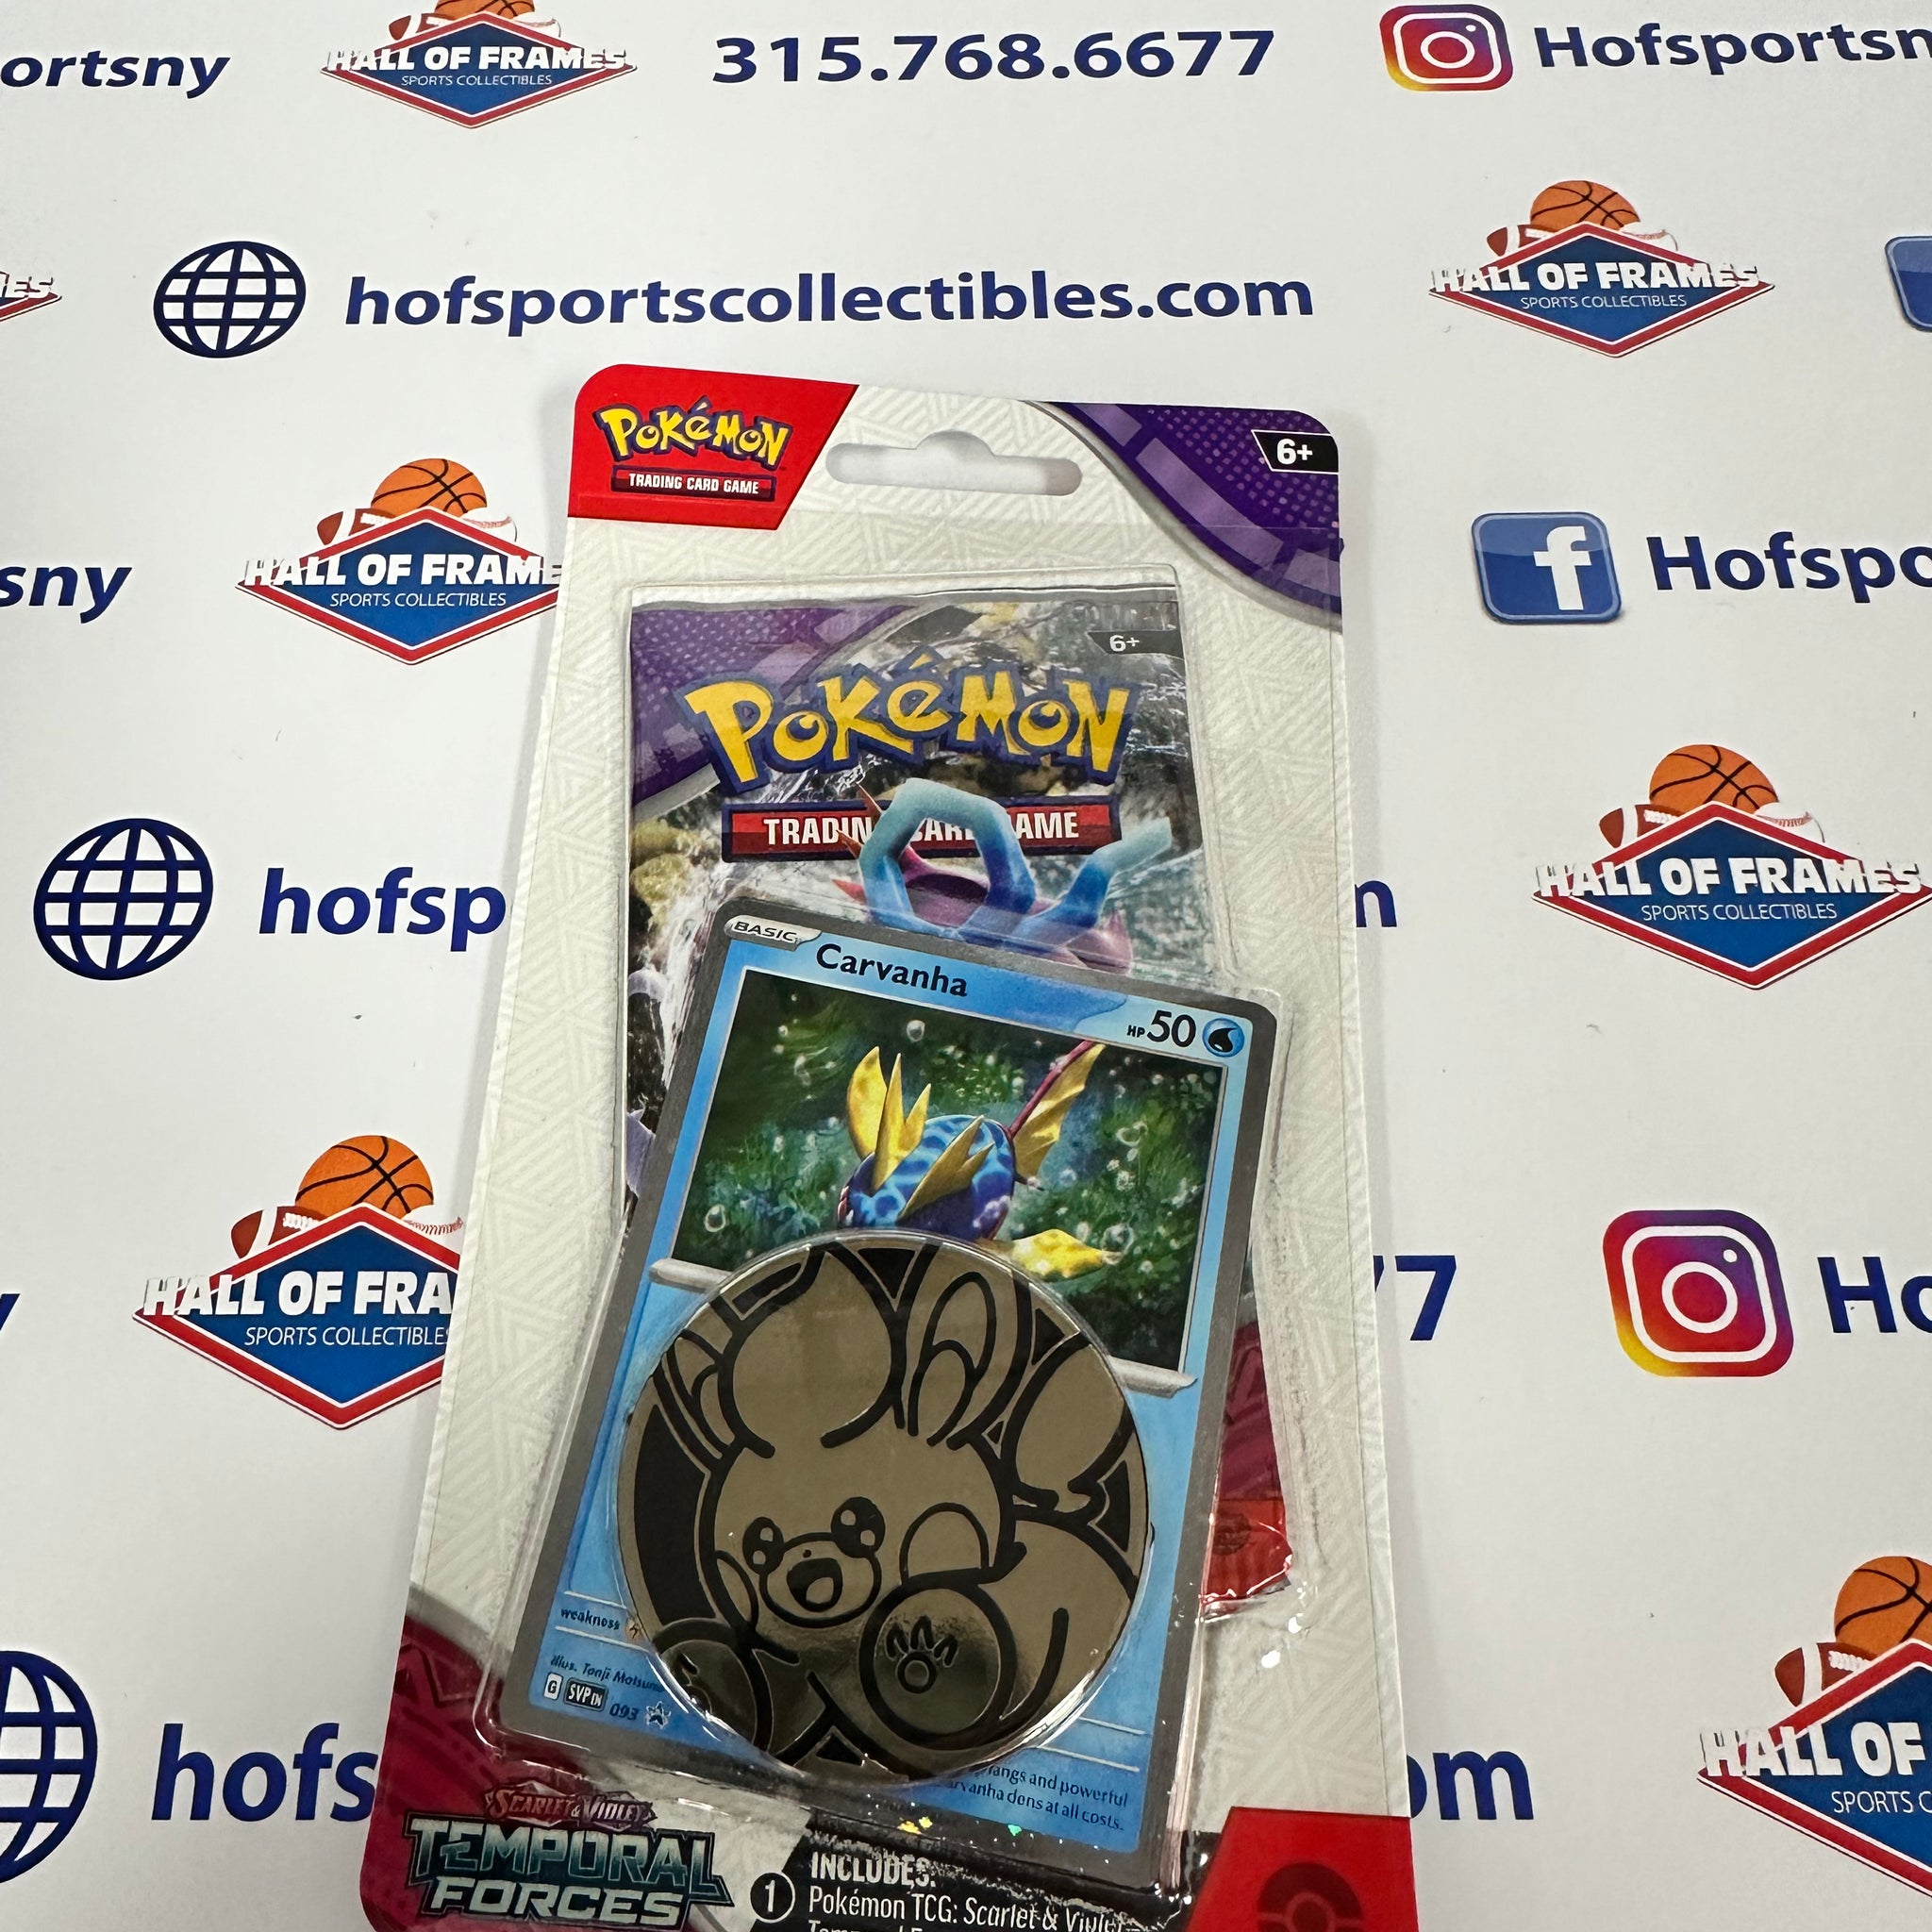 POKEMON TEMPORAL FORCES BLISTER PACK! CARVANHA PROMO!